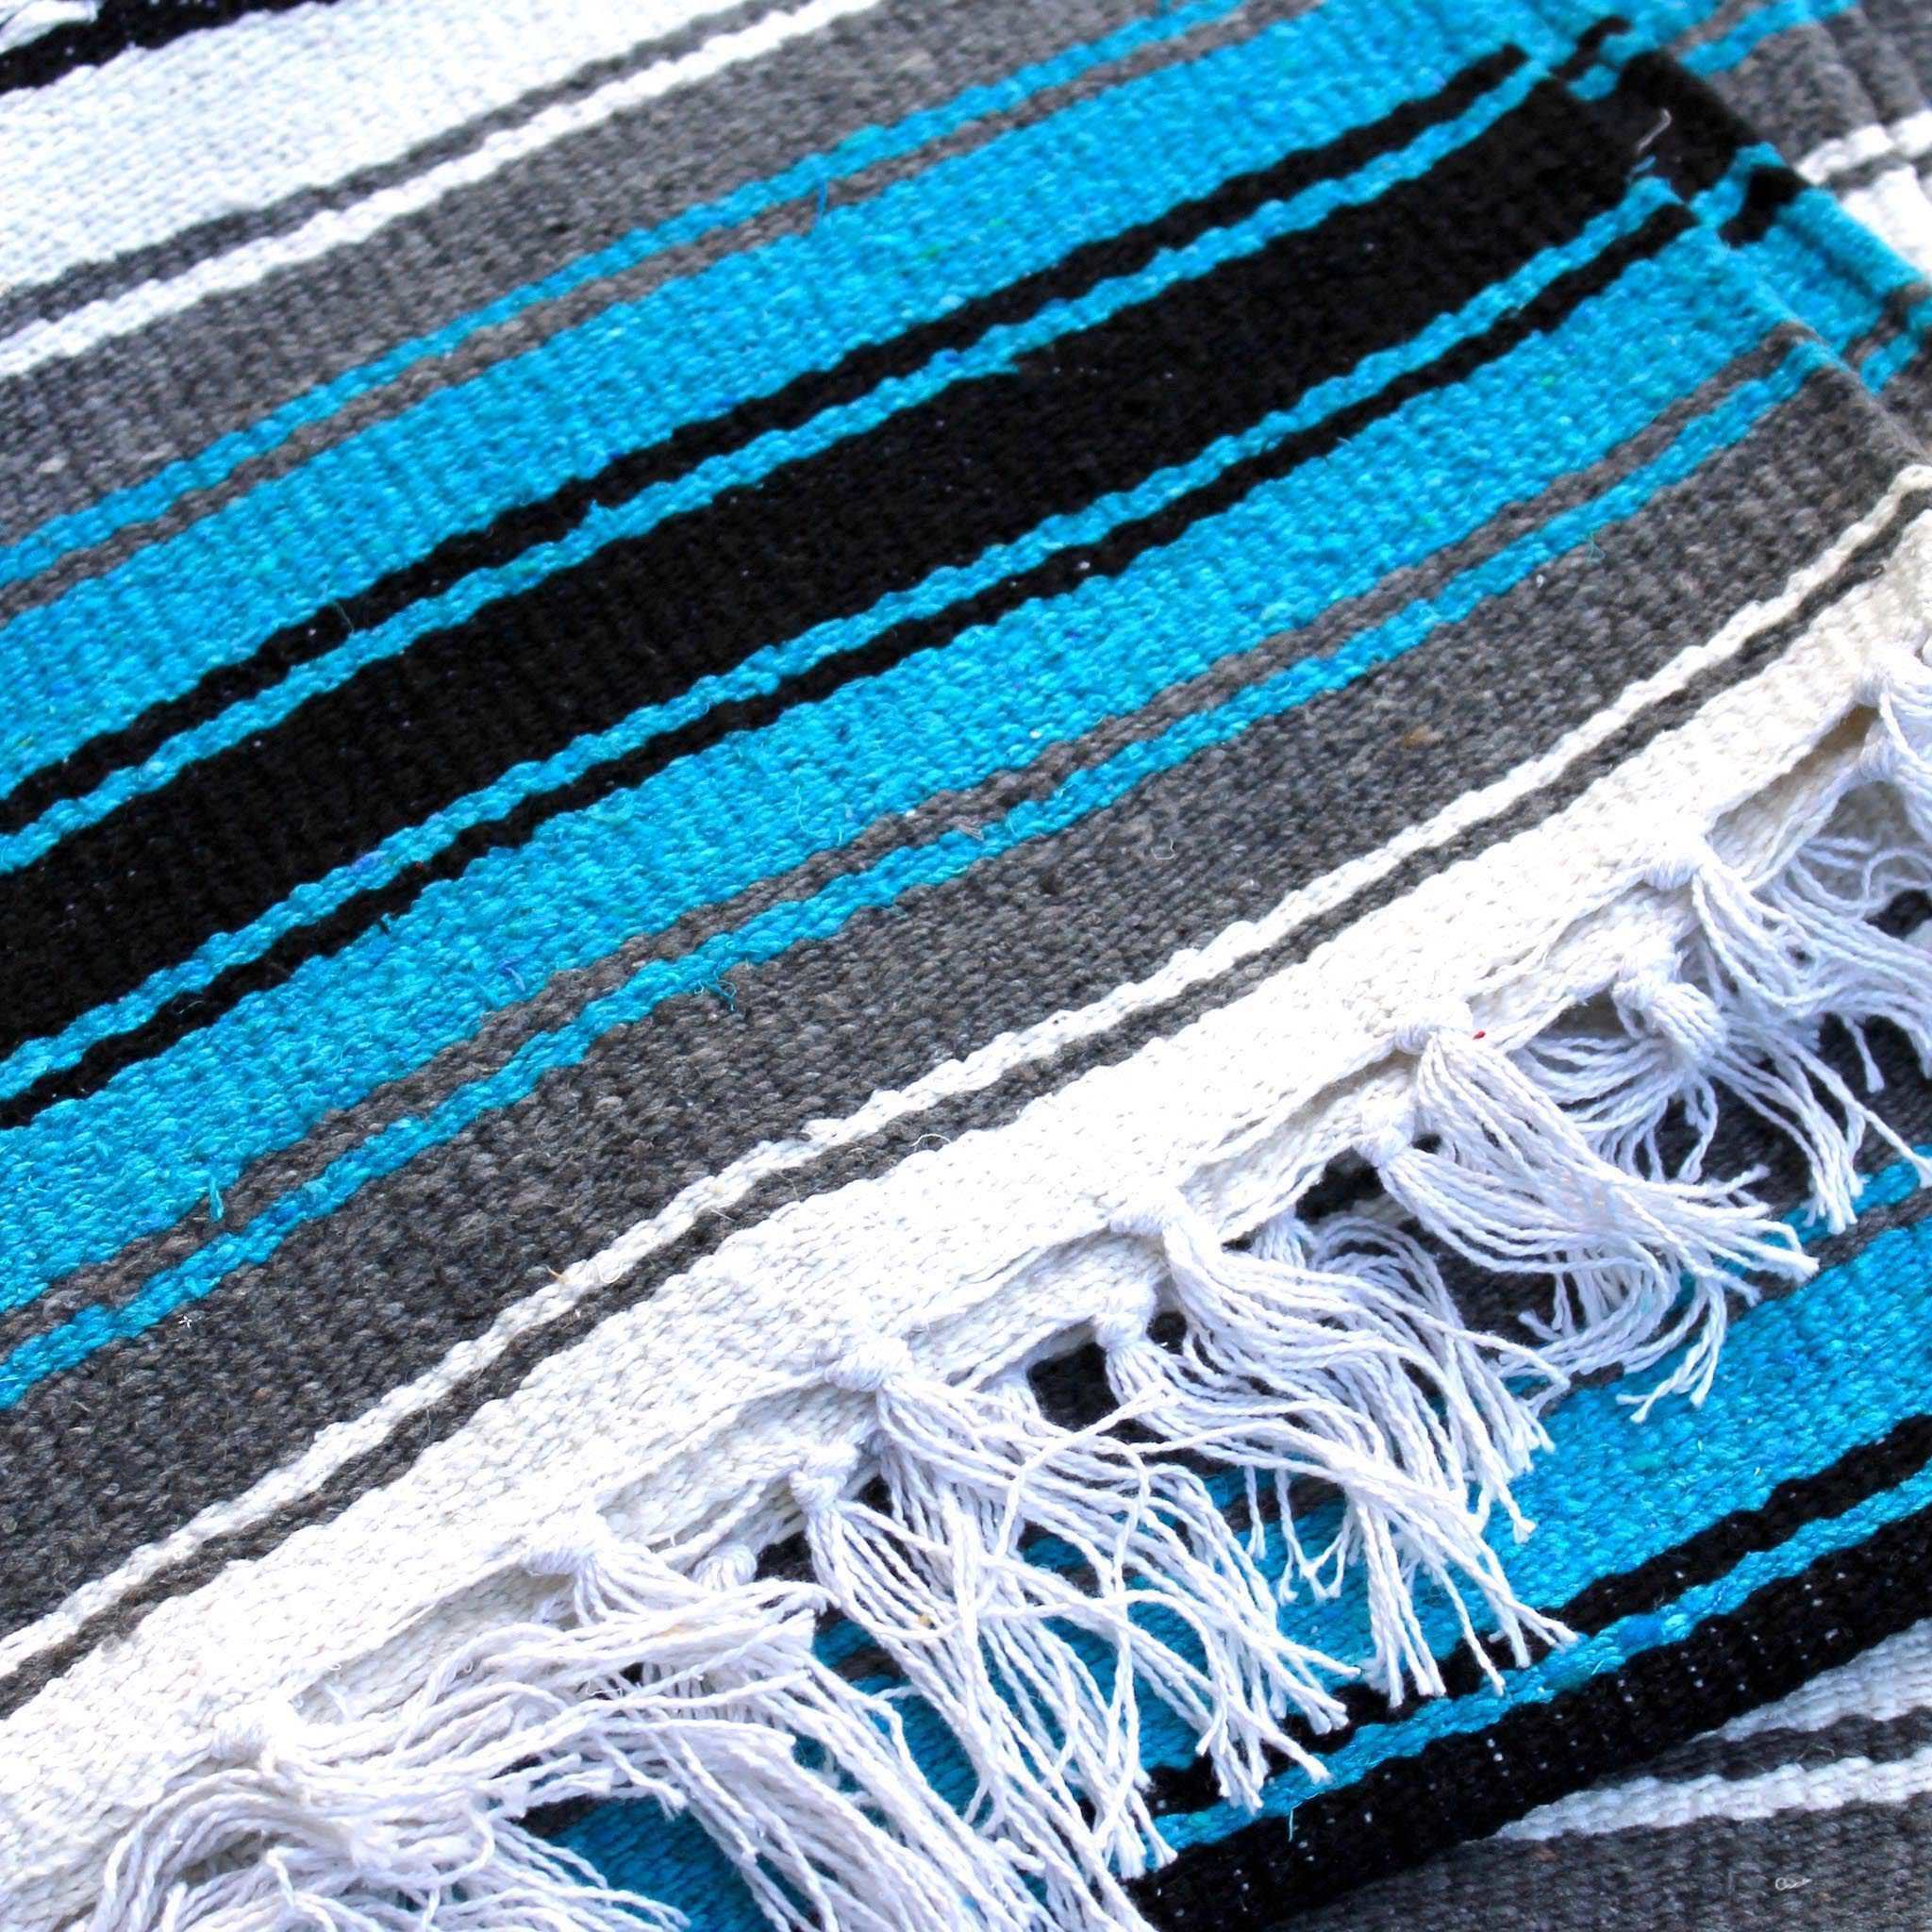 Close-up of blanket woven with alternating solid stripes in white, black, grey and bright turquoise, and white stripe with pattern of small black diamonds, edge of blanket has white fringe.